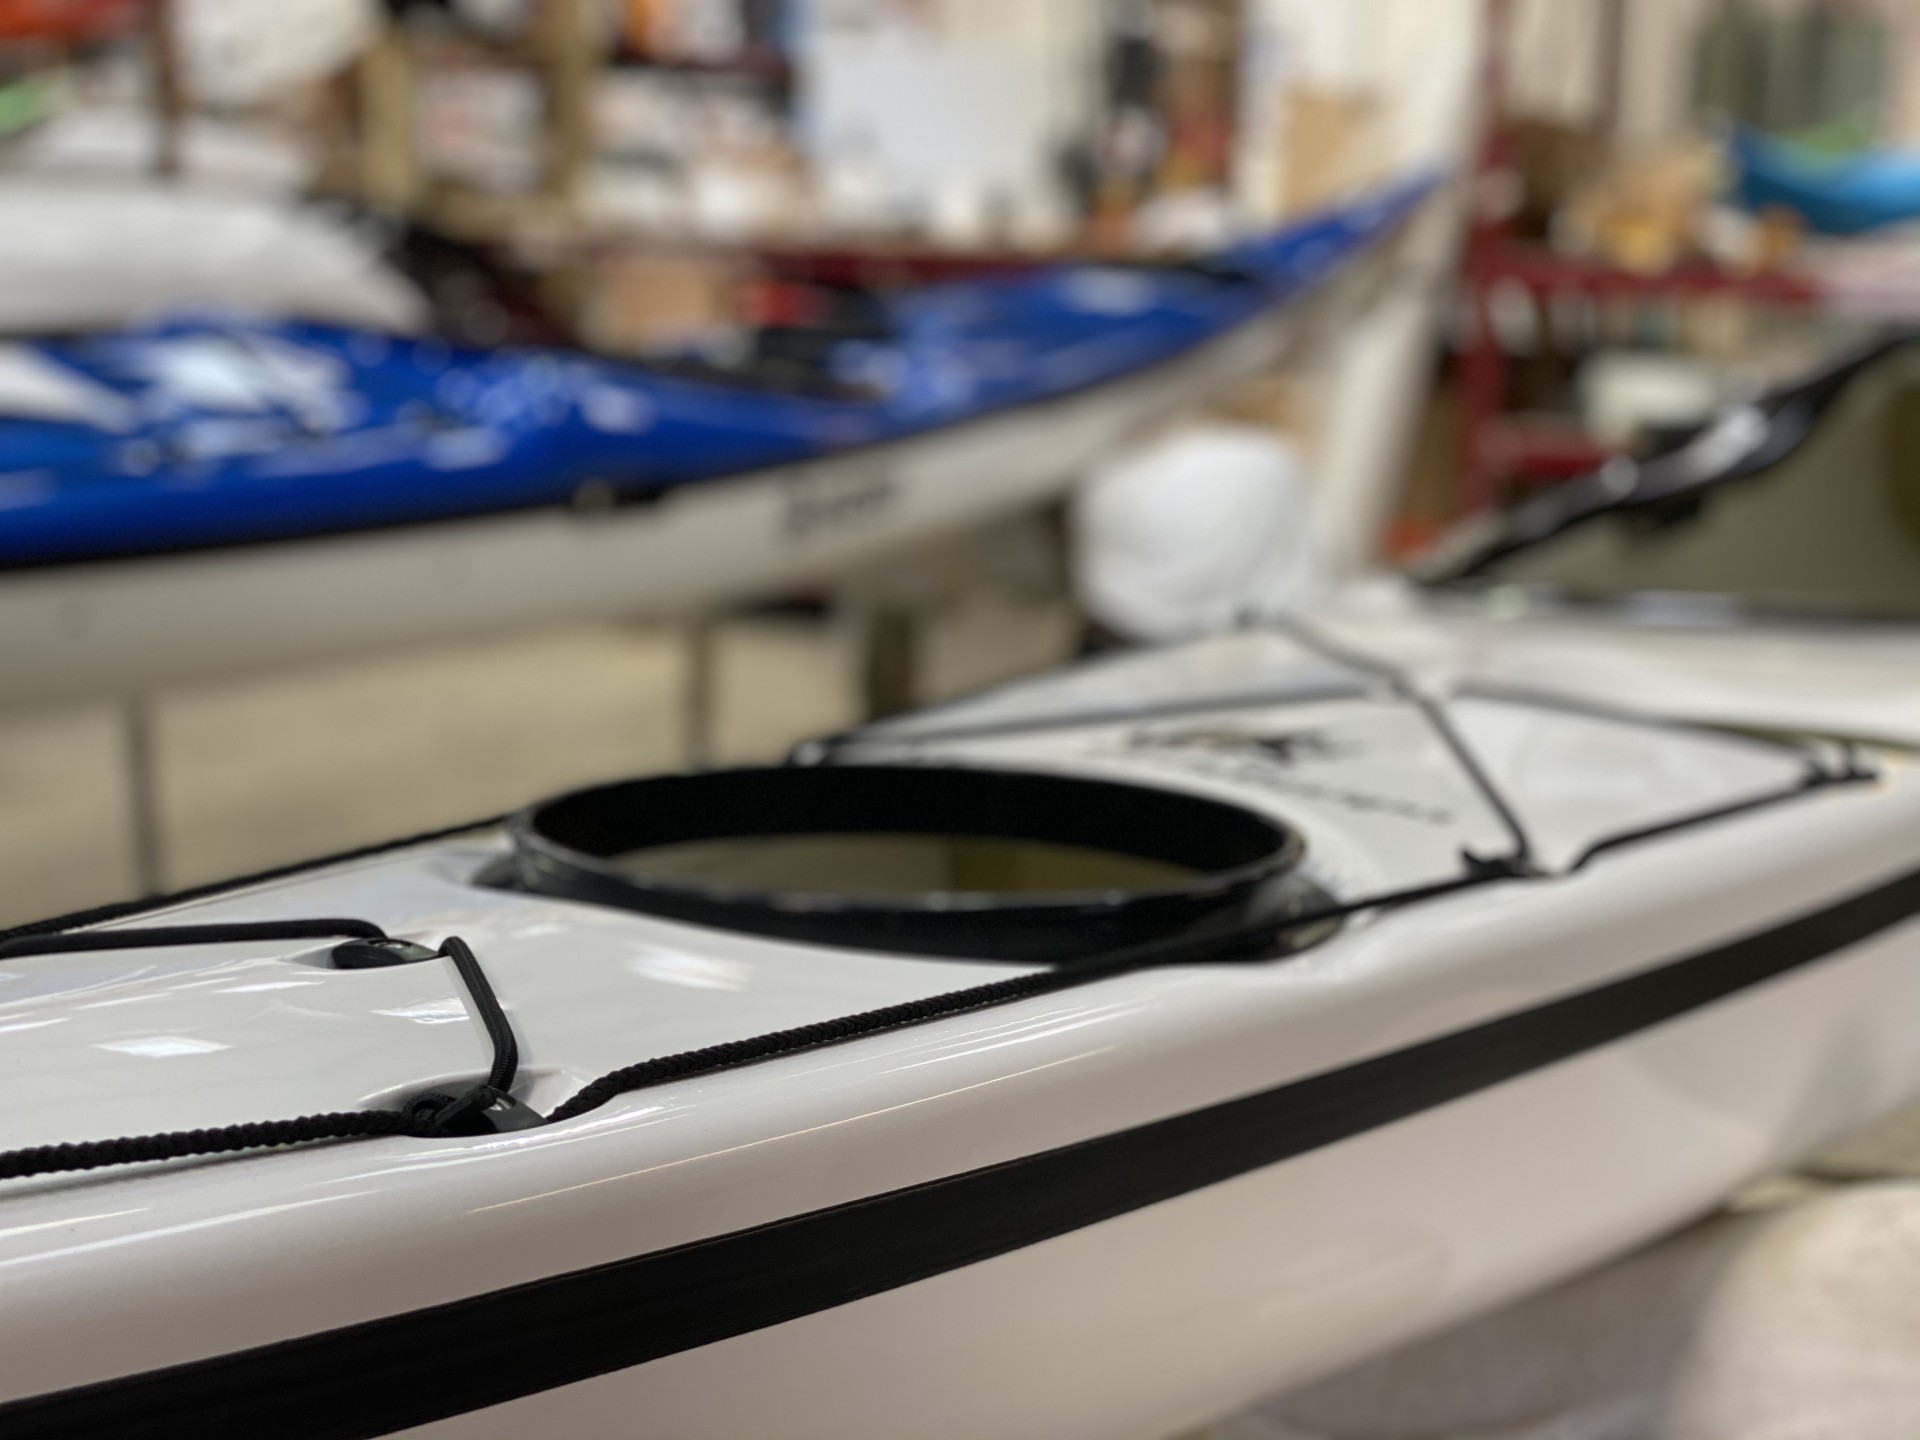 Romany Surf composite sea kayak showing the open rear hatch